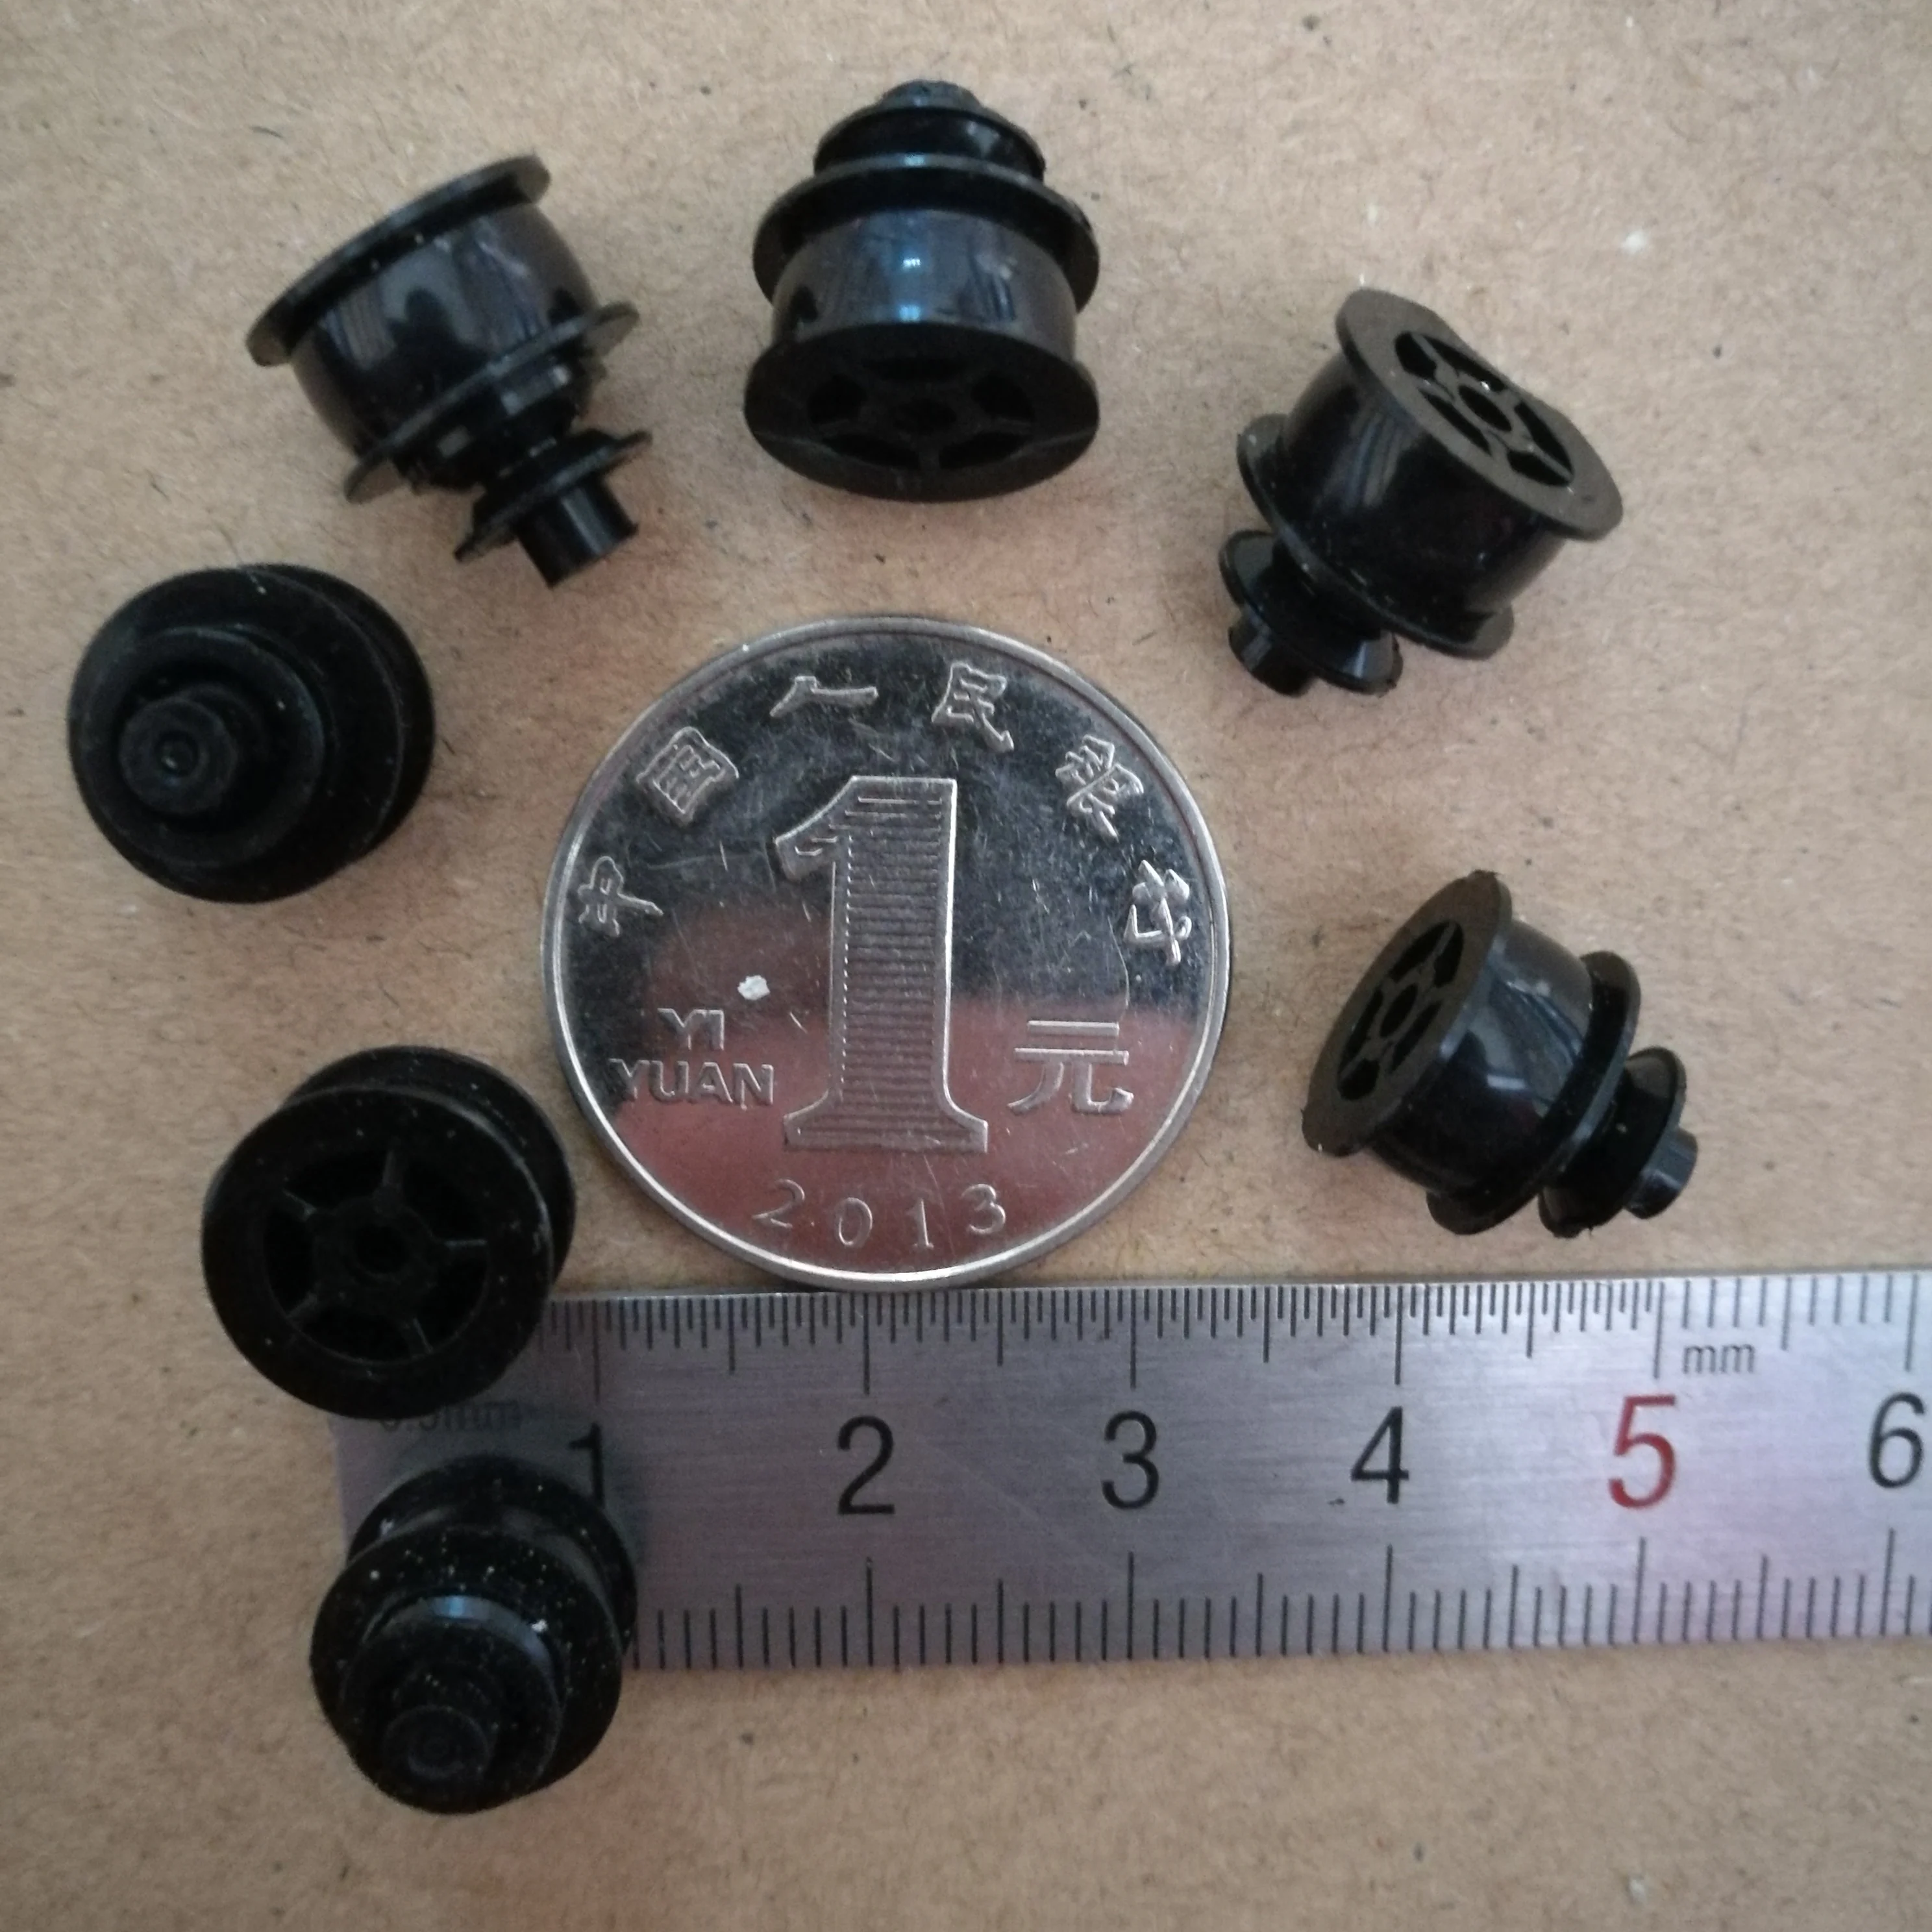 

10Pcs Outer Diameter 11mm, Middle Hole 2mm, Height 11.5mm Motor Wheel Double-layer Motor Wheel Flat Belt Pulley